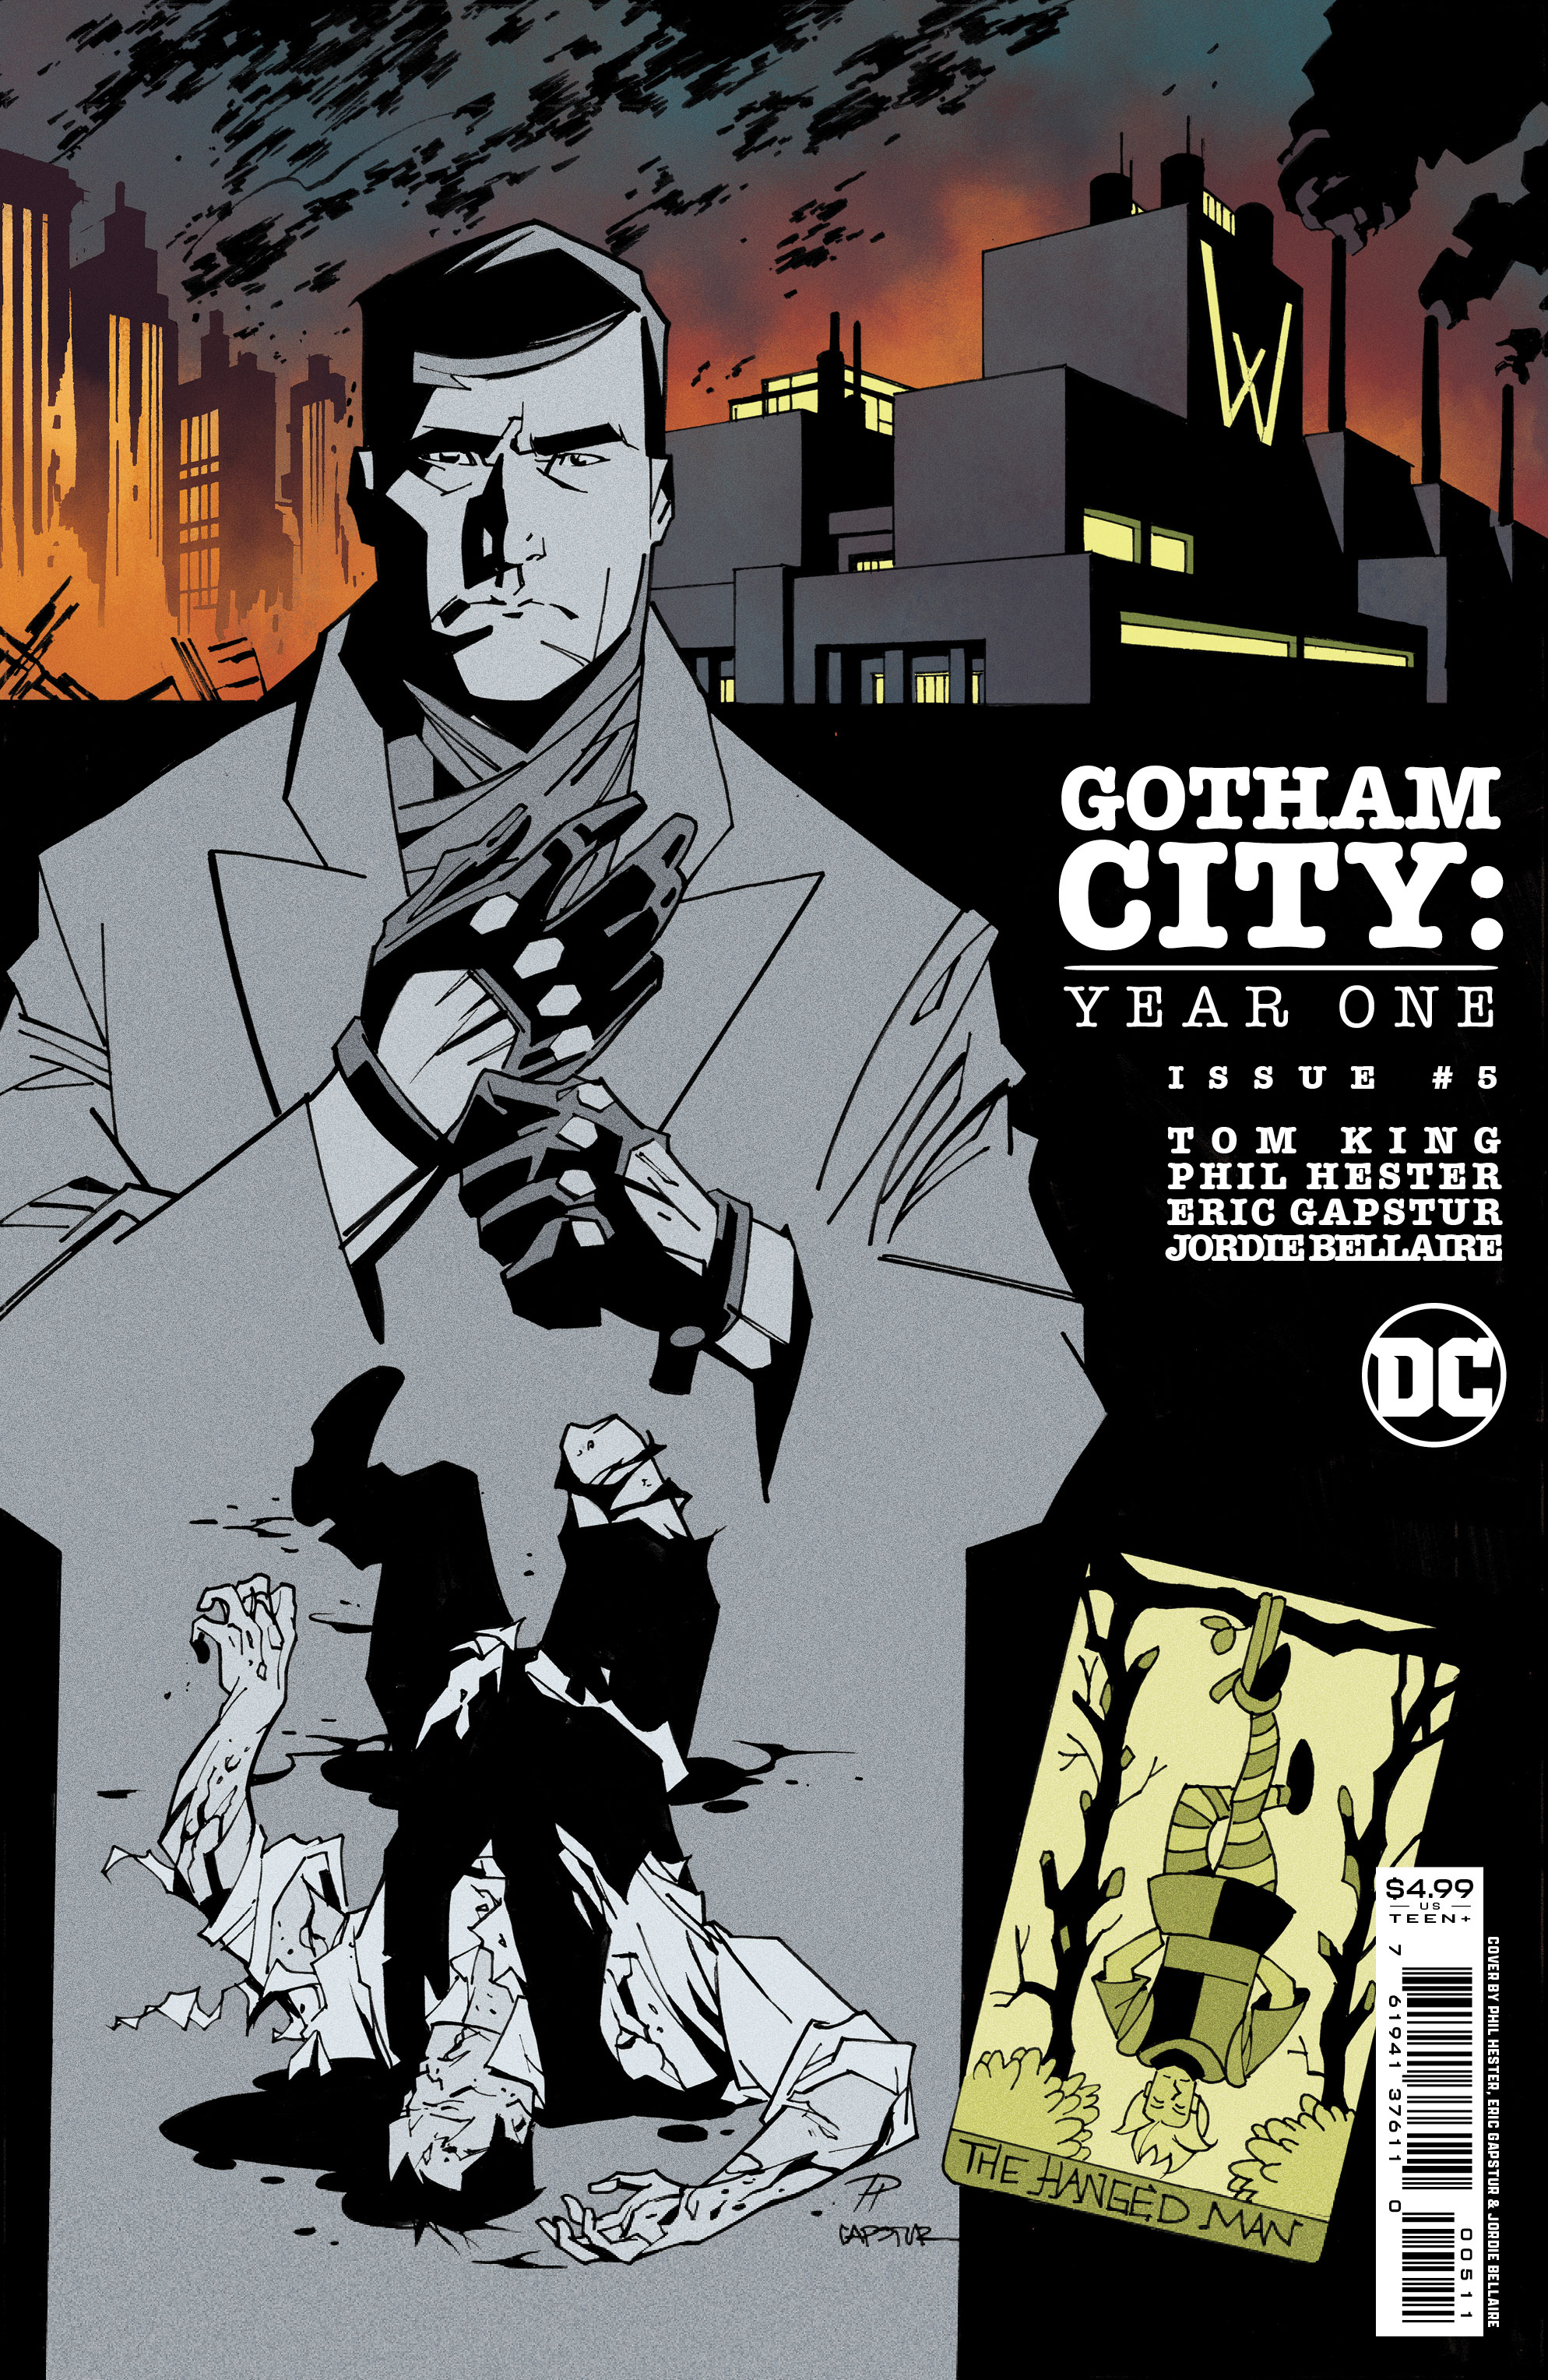 Gotham City Year One #5 Cover A Phil Hester & Eric Gapstur (Of 6)